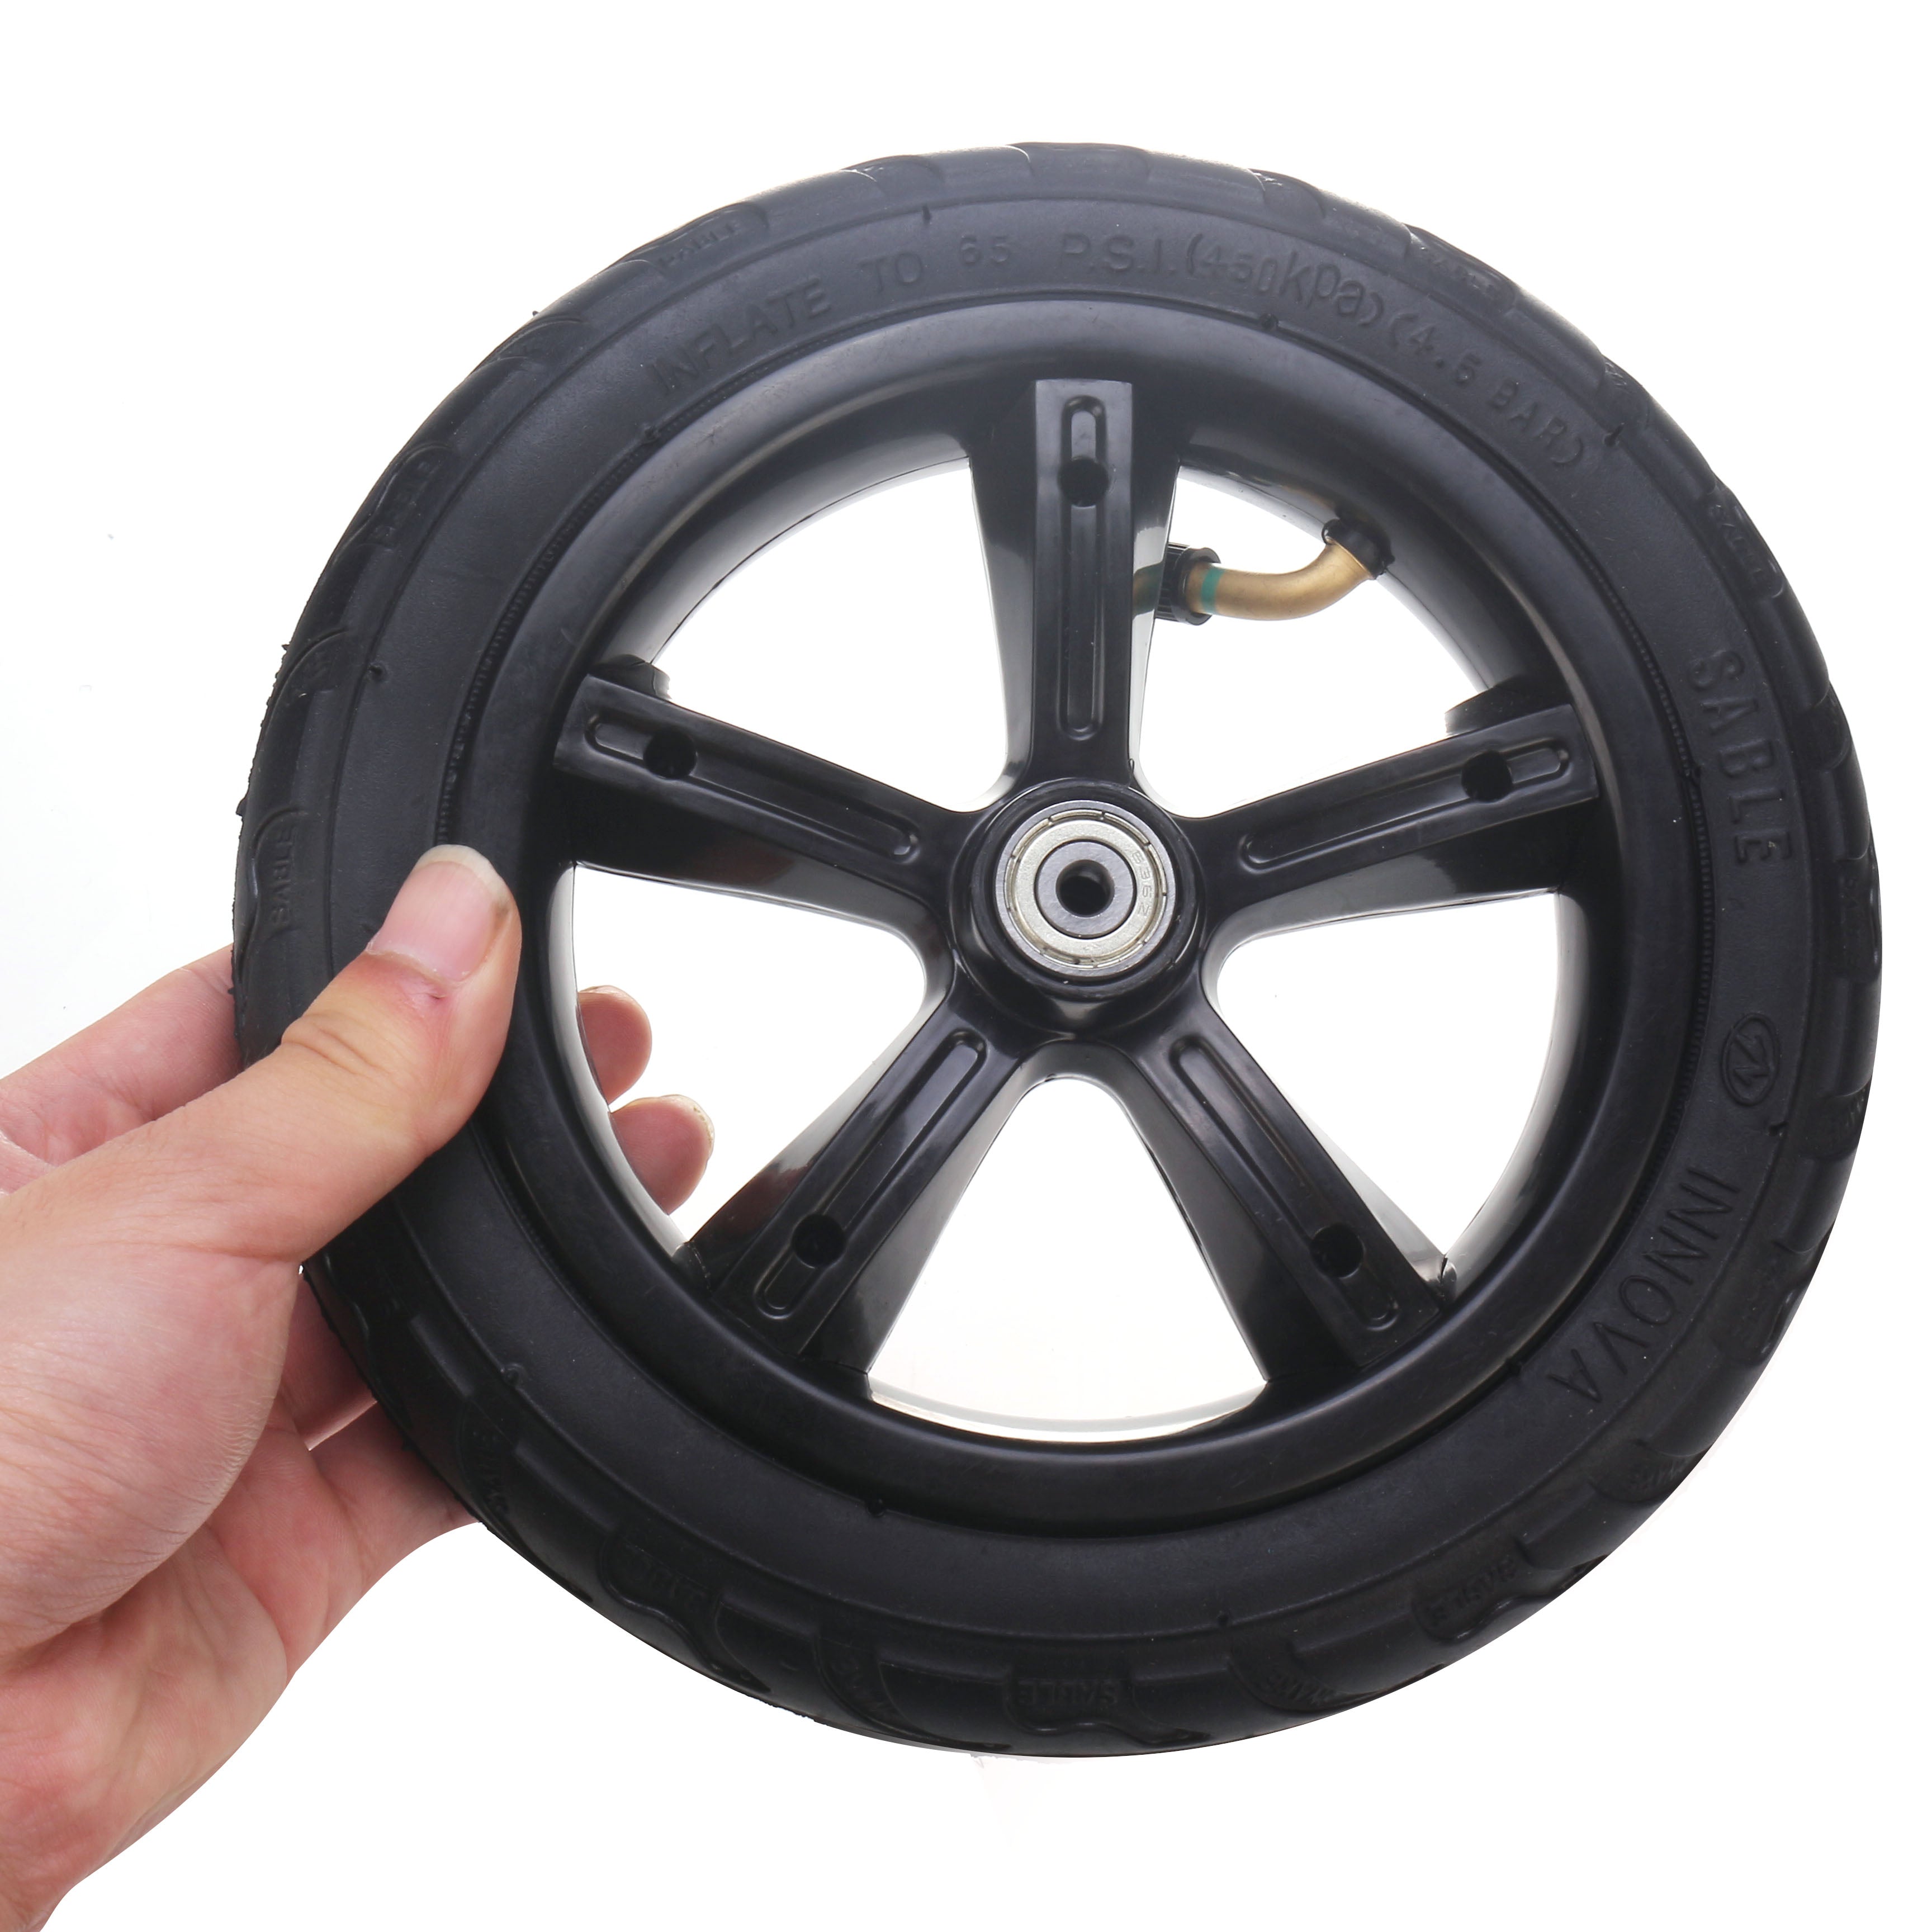 Dark Slate Gray 6mm/8mm Inflated Pneumatic Wheel Tire/Inner Tube For E-twow S2 Scooter